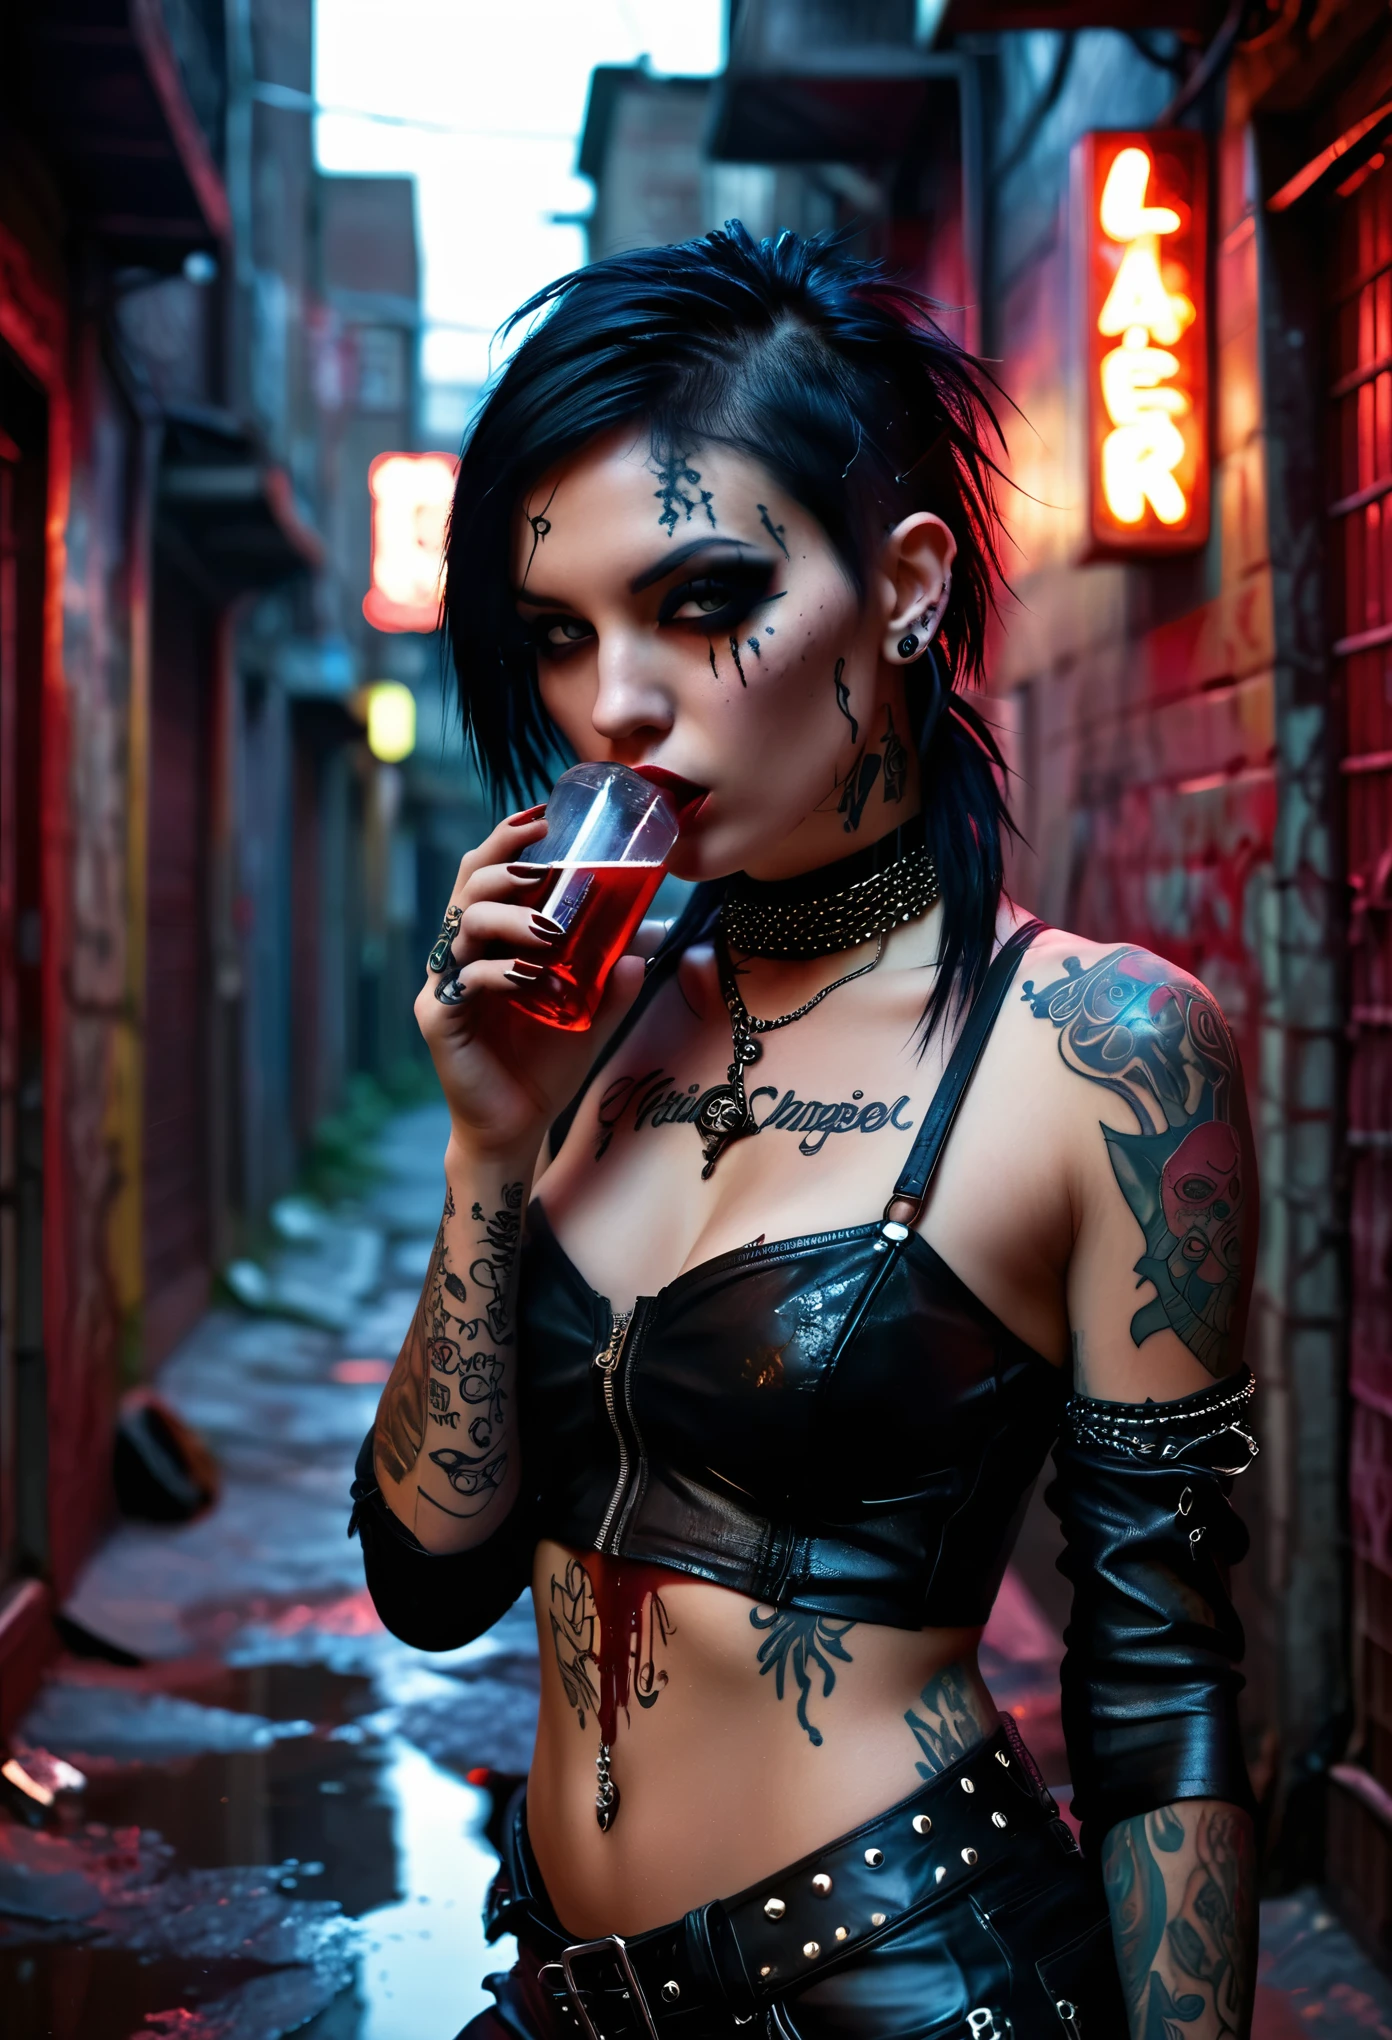 In a dimly lit, grungy alleyway, a gothic-punk girl, adorned in ripped leather and piercings, glares menacingly as she sips from a vial of dark, blood-red liquid. The shadows dance upon her intricately tattooed skin, her piercing gaze punctuated by the flickering light from a neon sign. Clash between the harsh reality of the urban setting and the ethereal and dark beauty of the girl, as she stands guard against all who dare to cross her path.